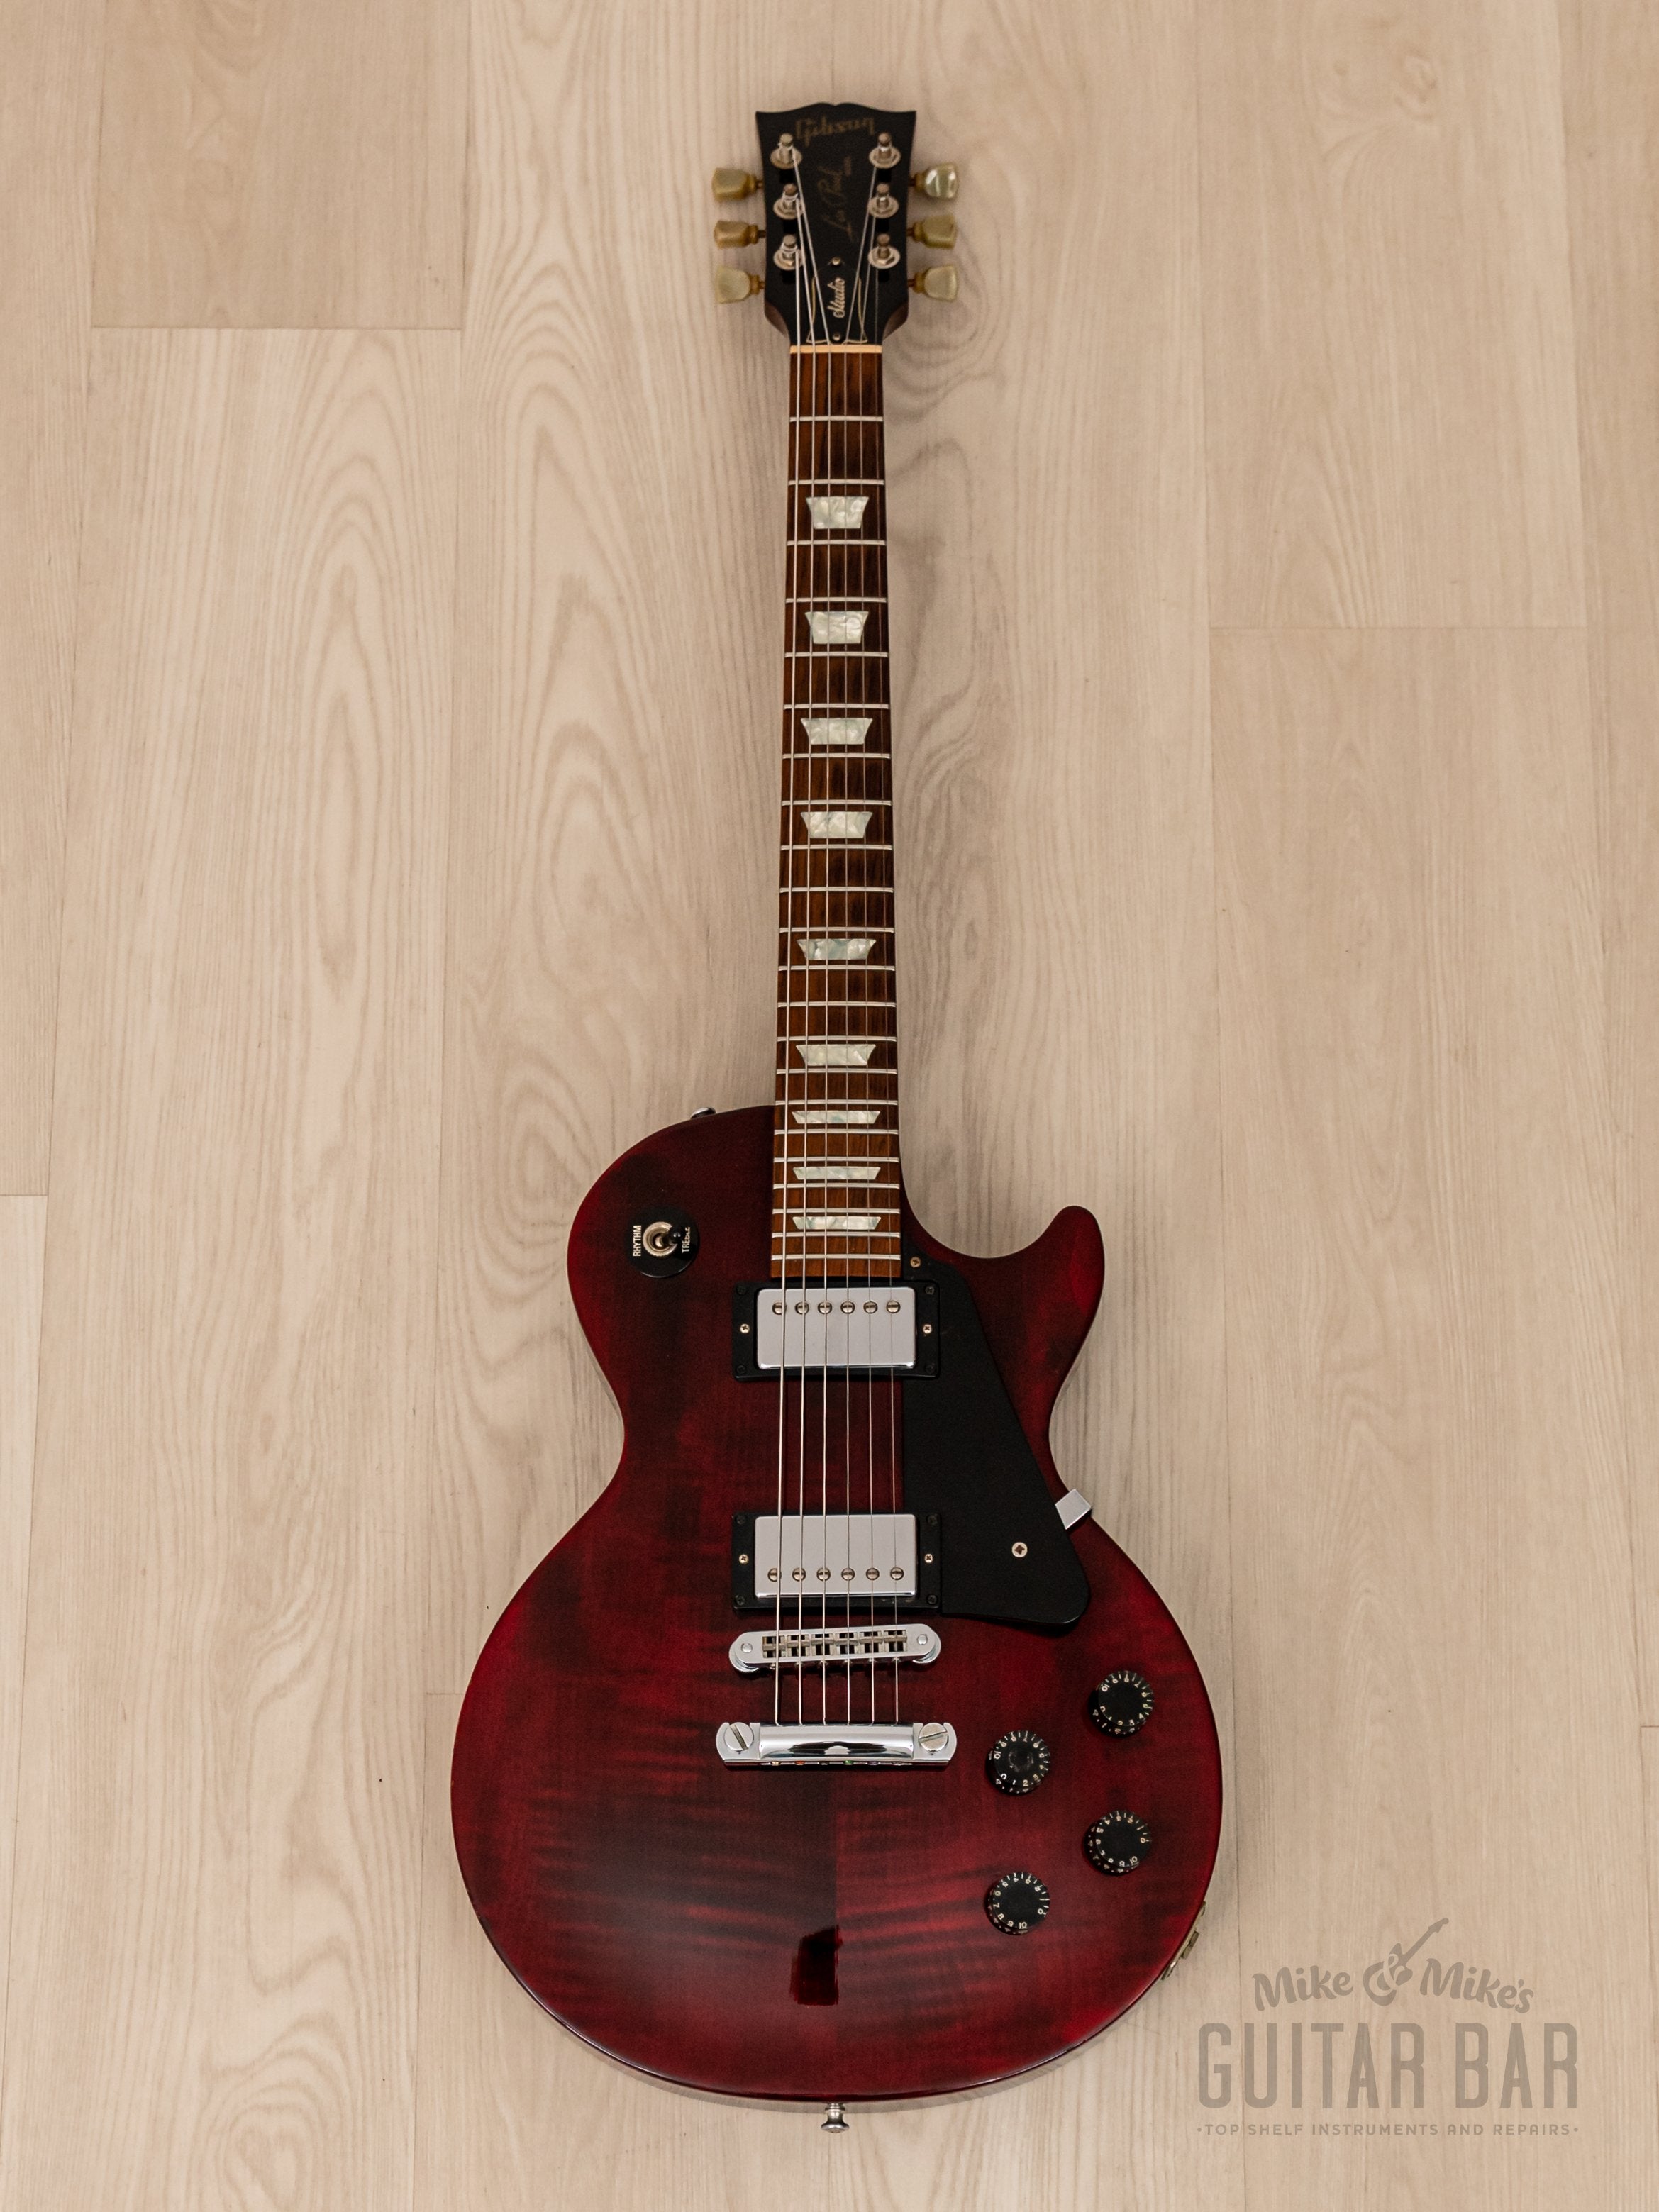 2002 Gibson Les Paul Studio Plus Flame Top Wine Red w/ Case & Tags, Yamano